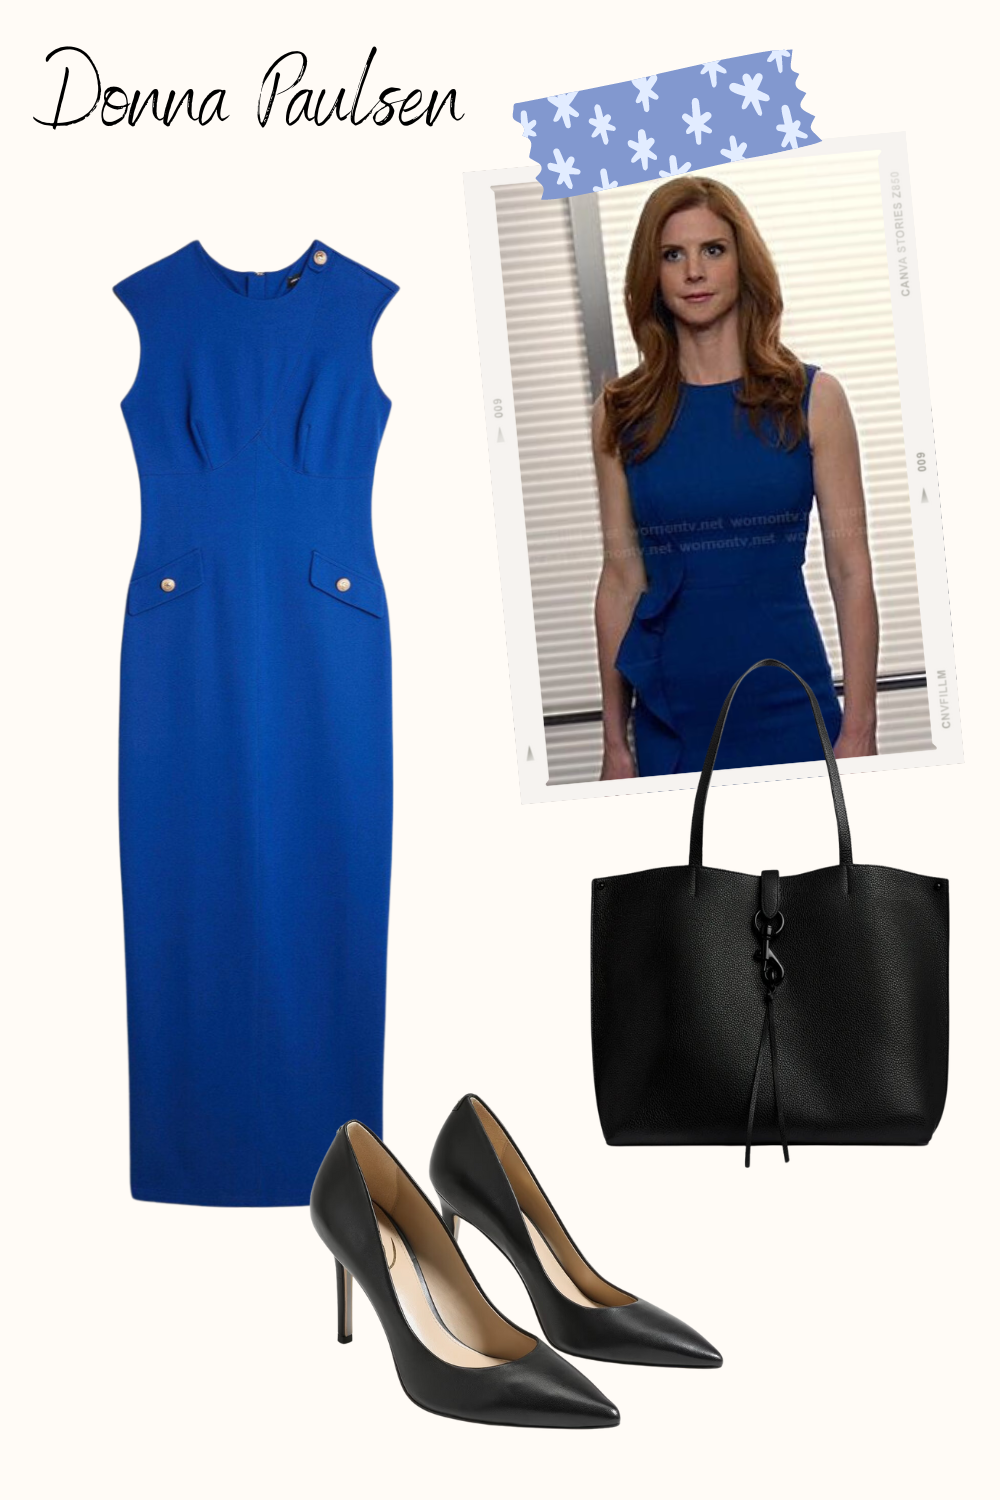 donna paulsen outfits